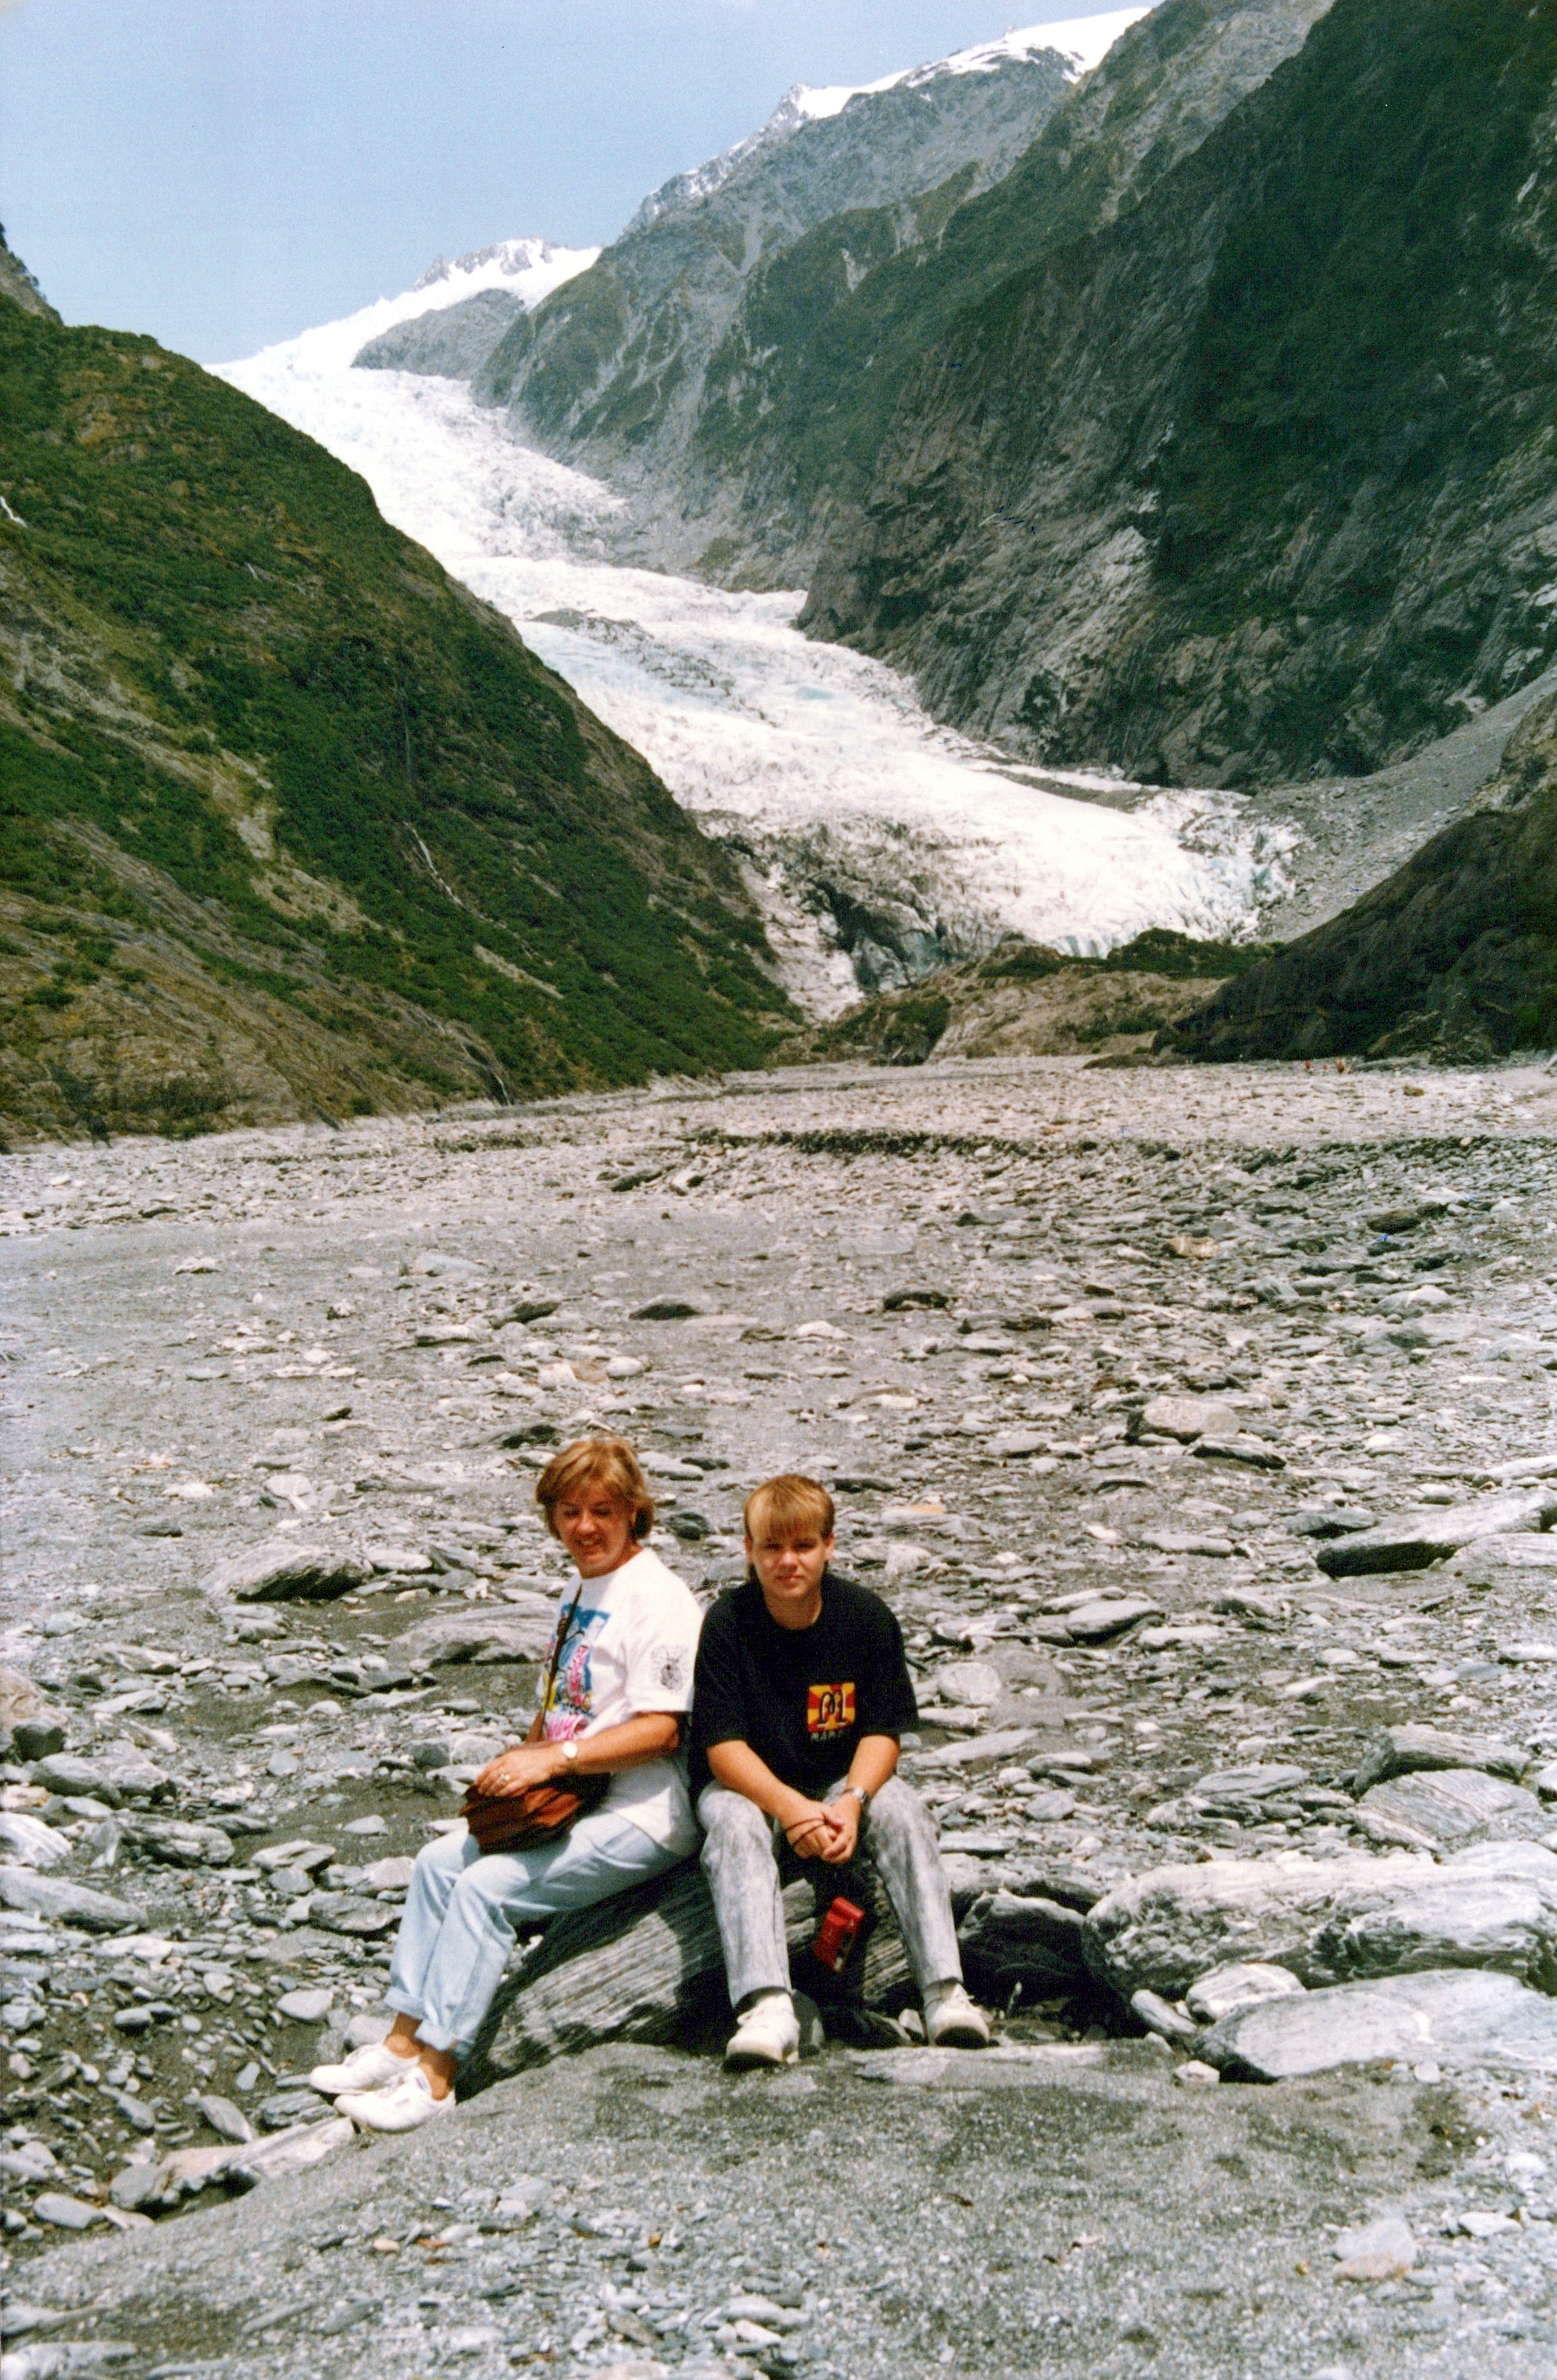 With Mark at Fox Glacier in New Zealand